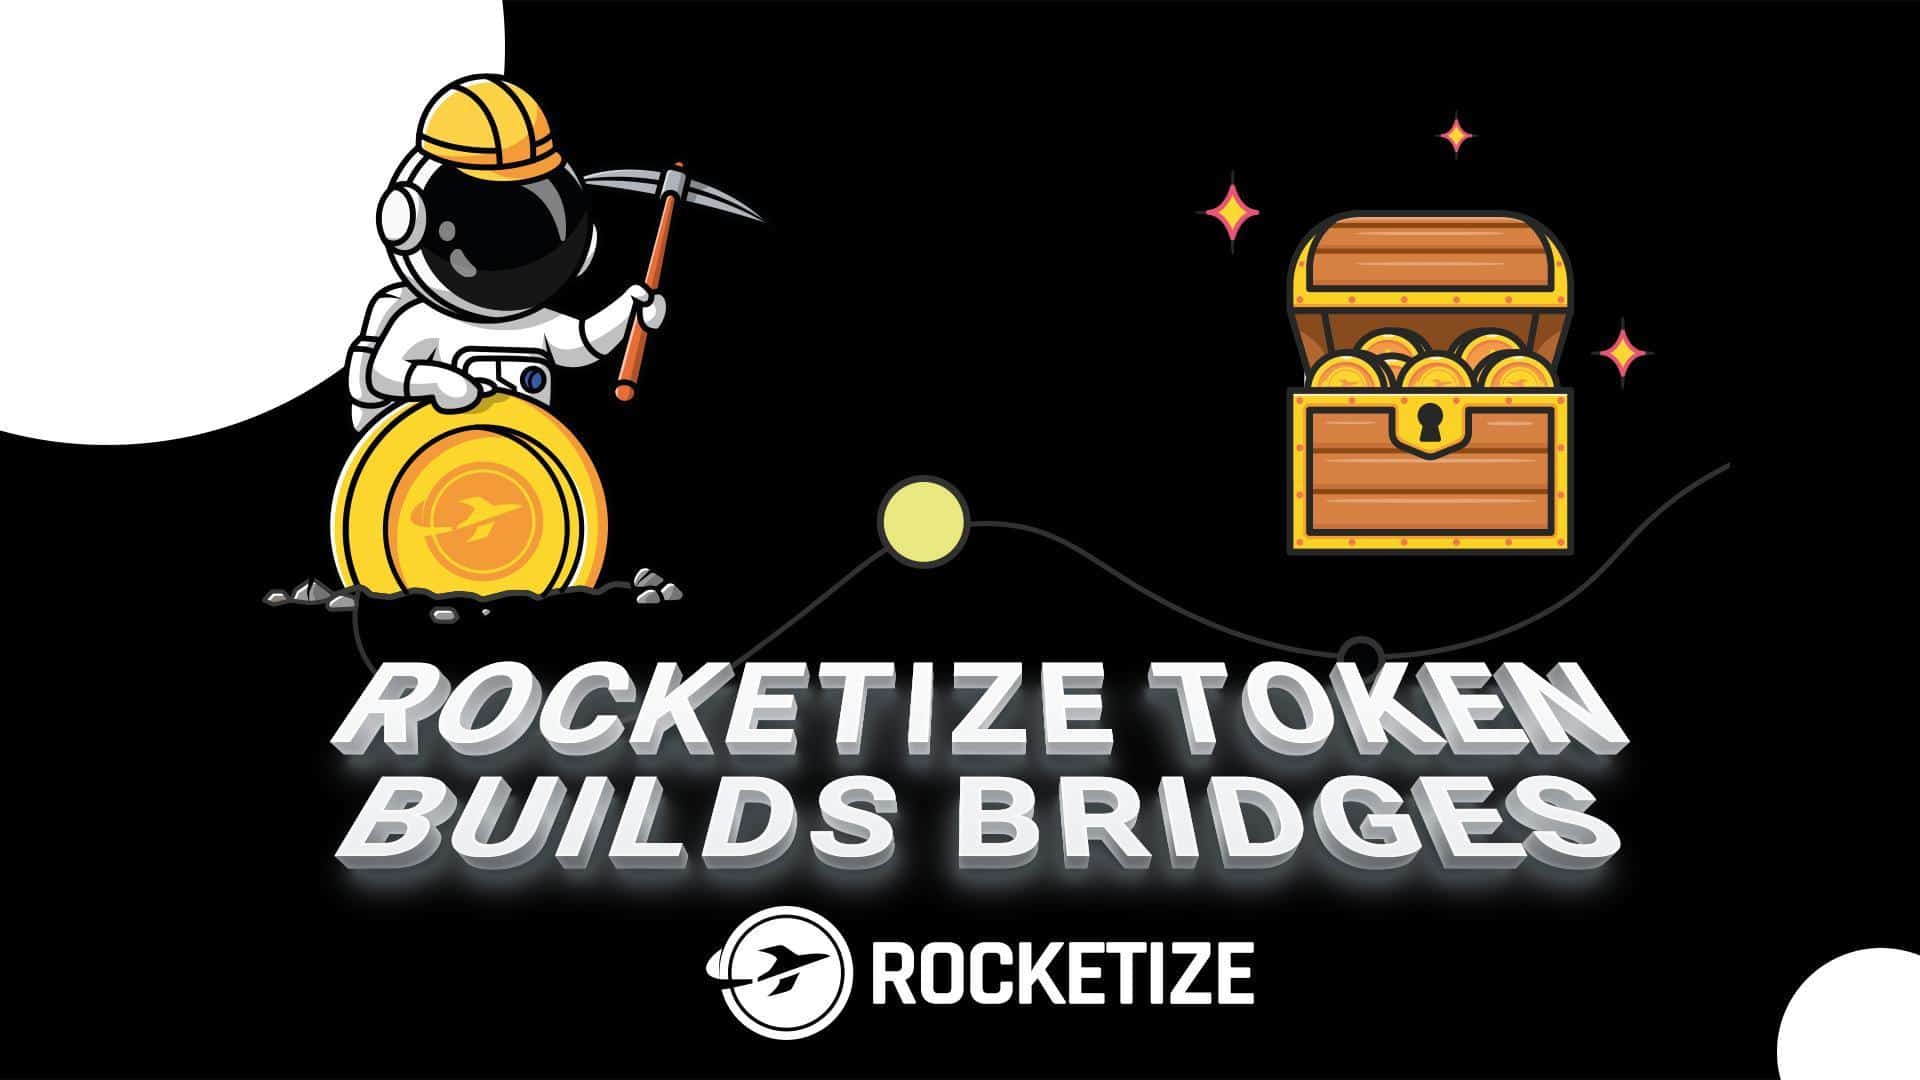 Axie Infinity and The Sandbox Revolutionized The Metaverse, But Rocketize Token Will Change The Way Investors View Meme Coins